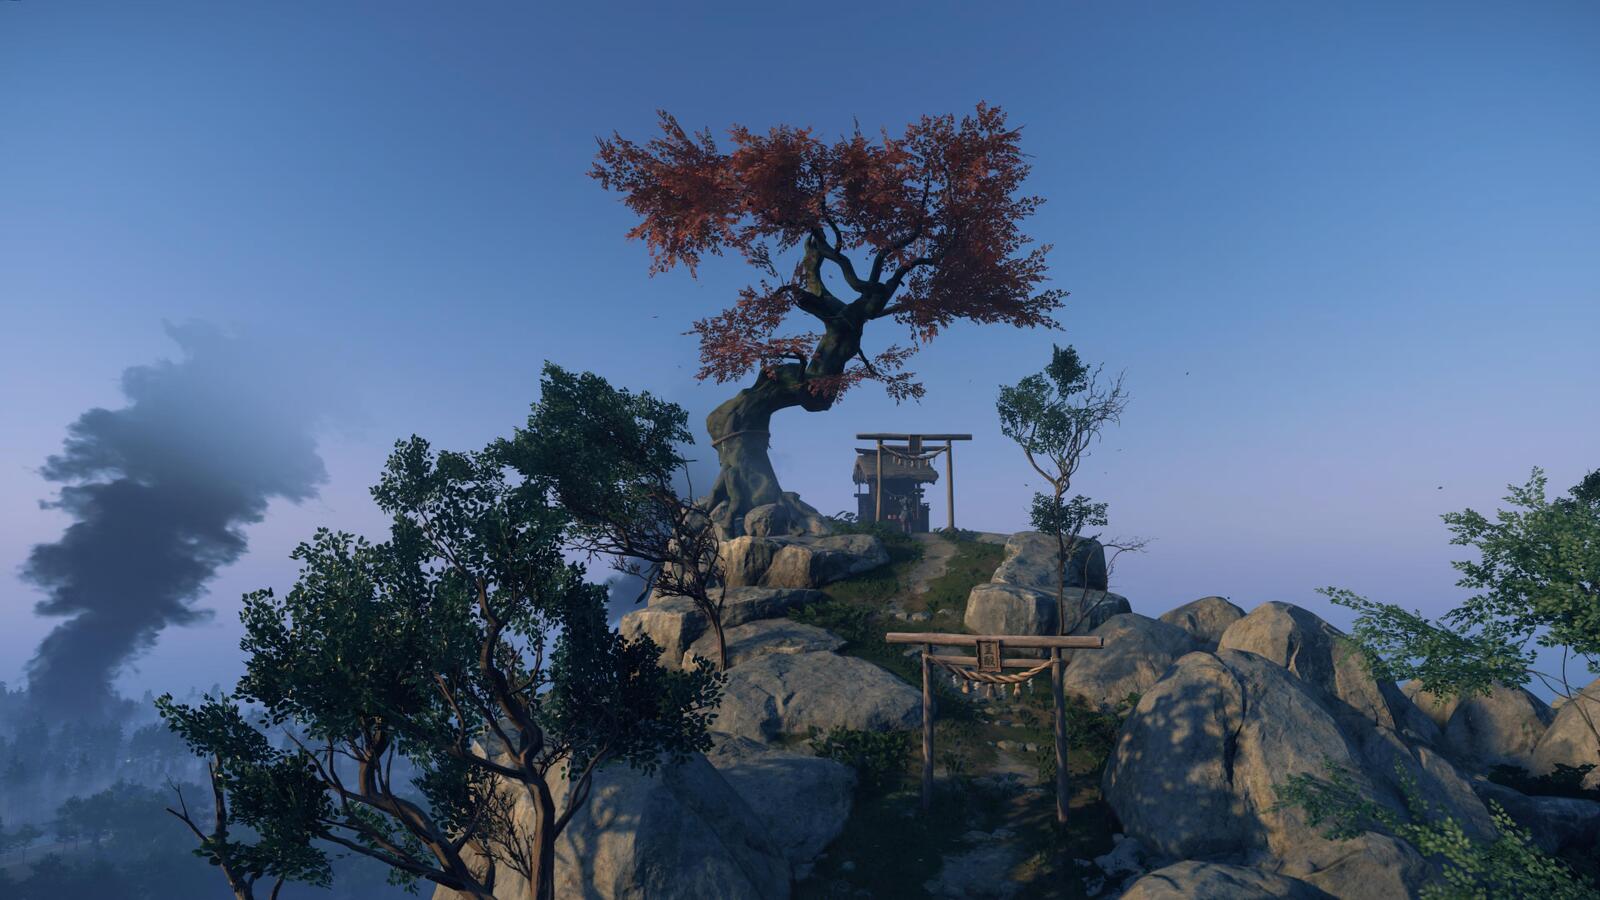 Shrine under a tree atop a hill